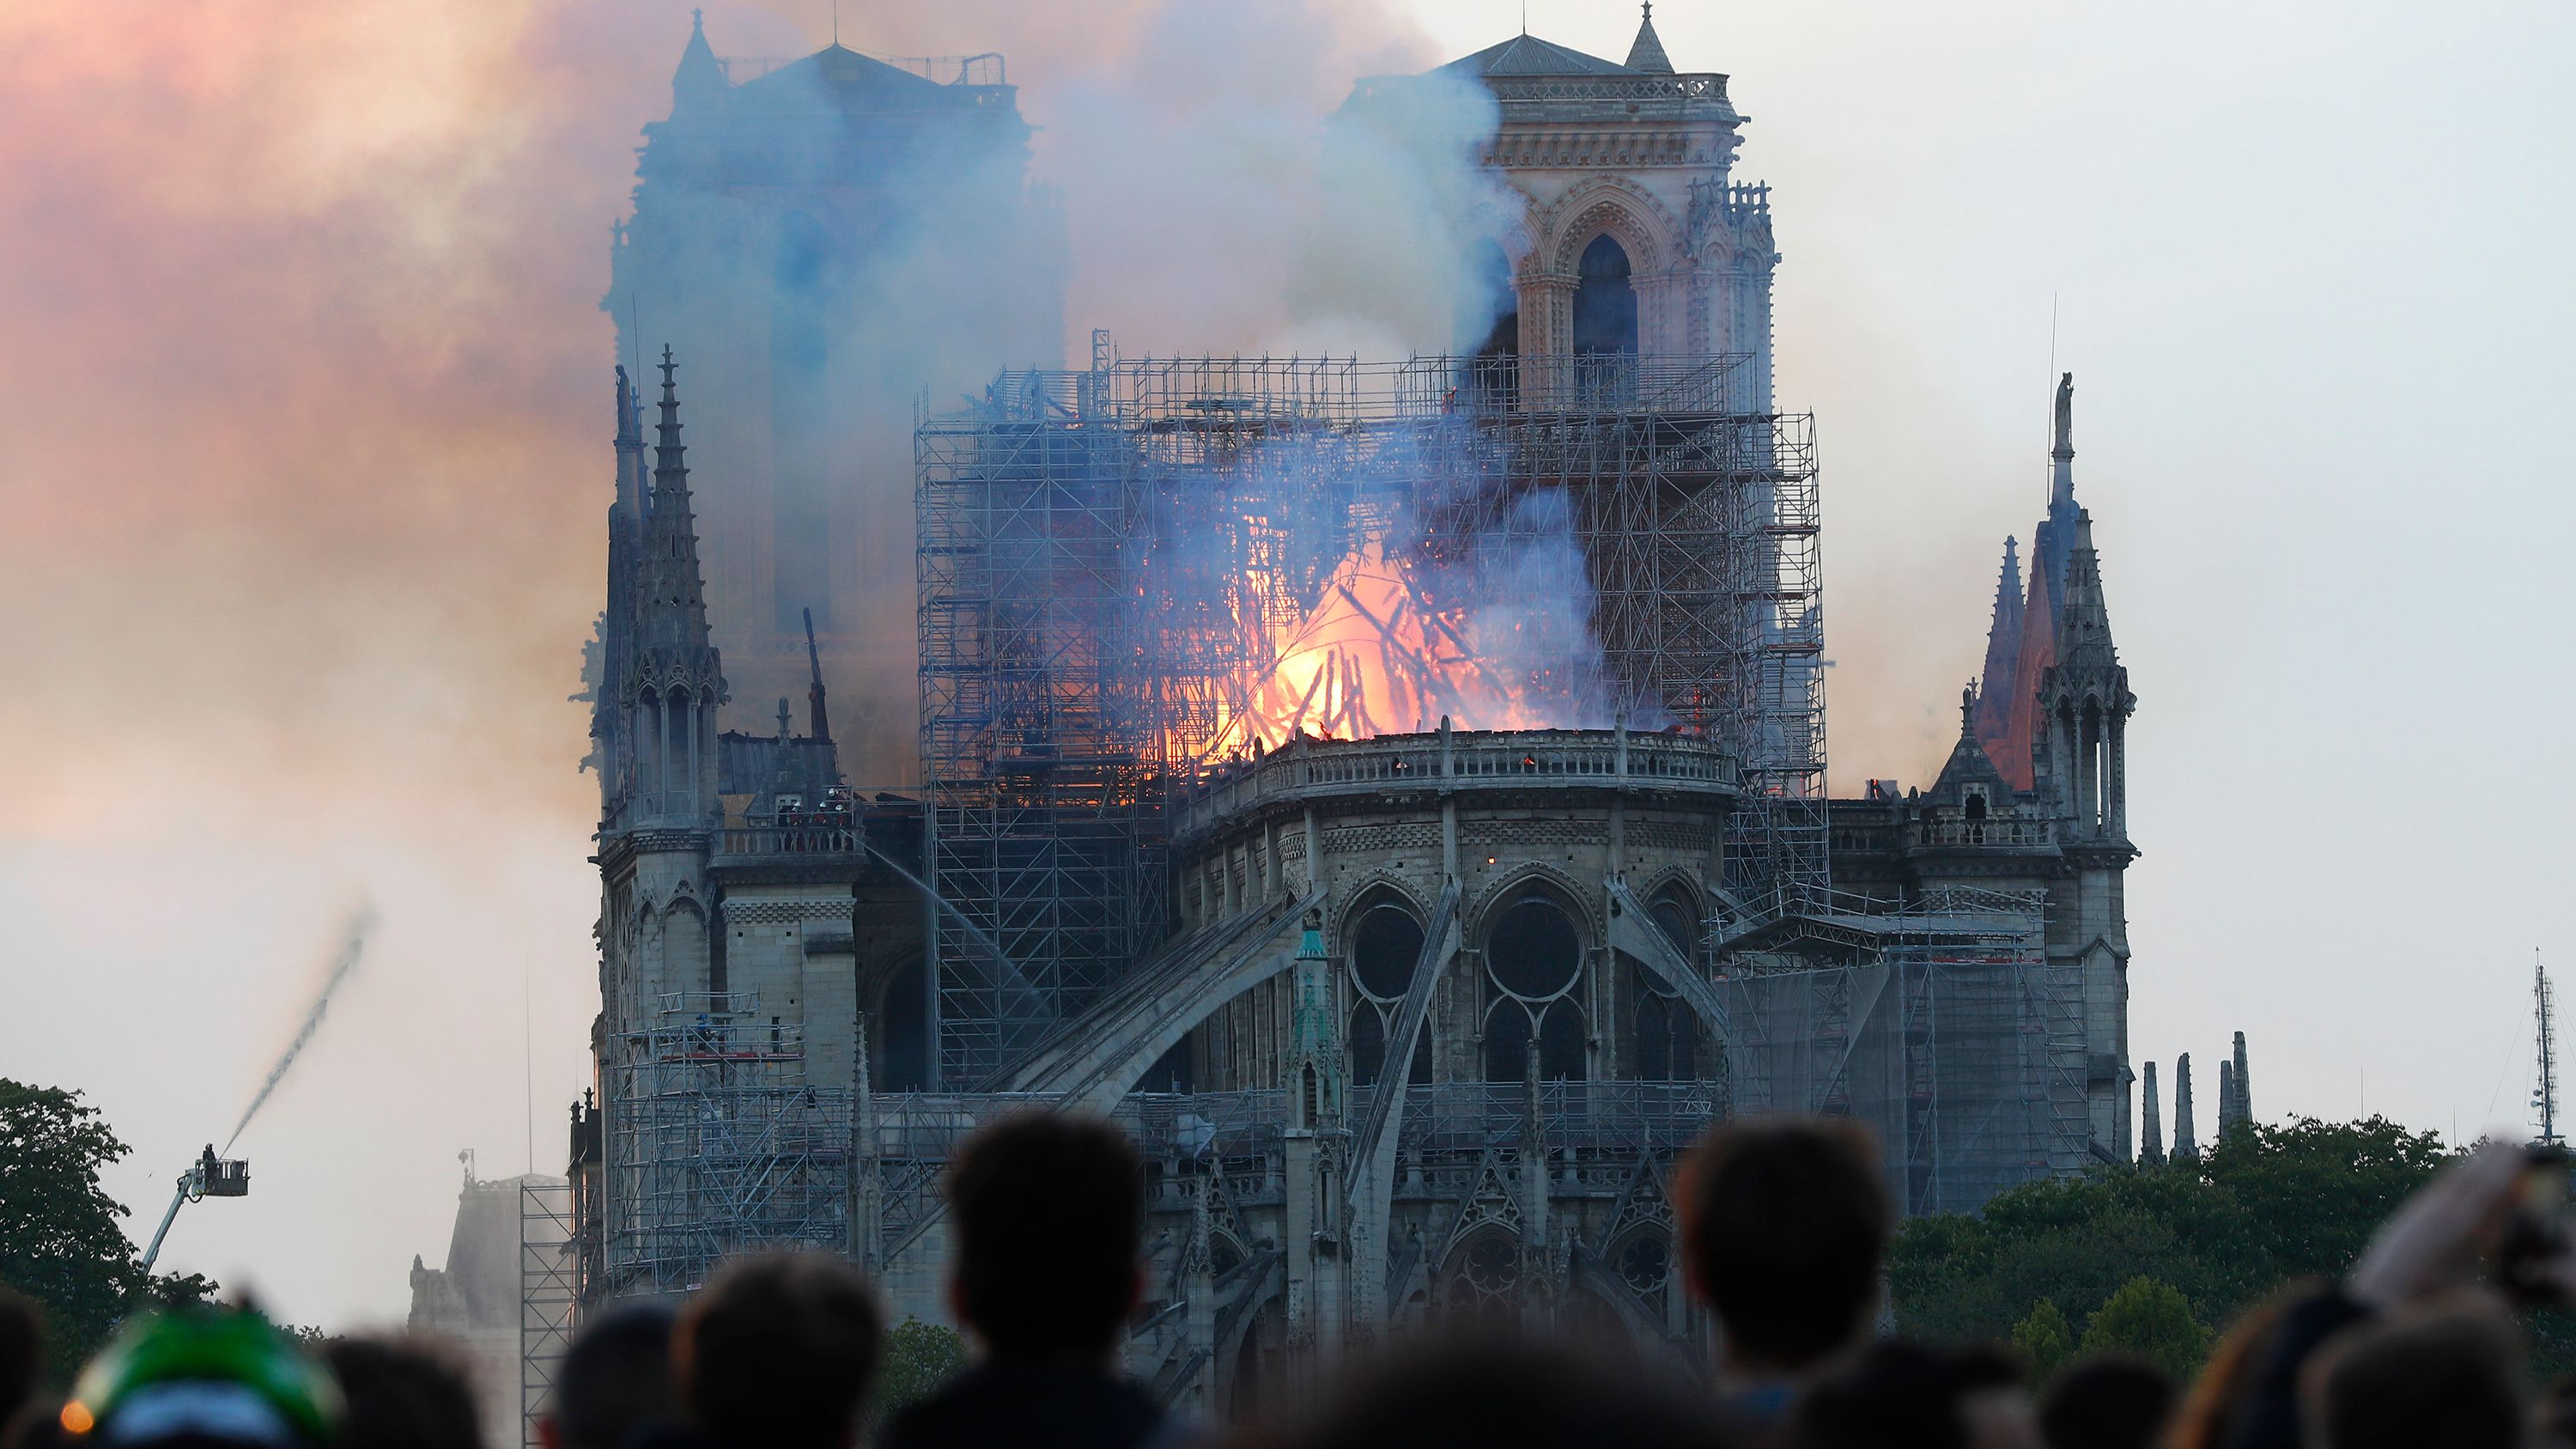 Paine Gillic Guilty Follow The Notre Dame Cathedral fire altered the Paris skyline | CNN